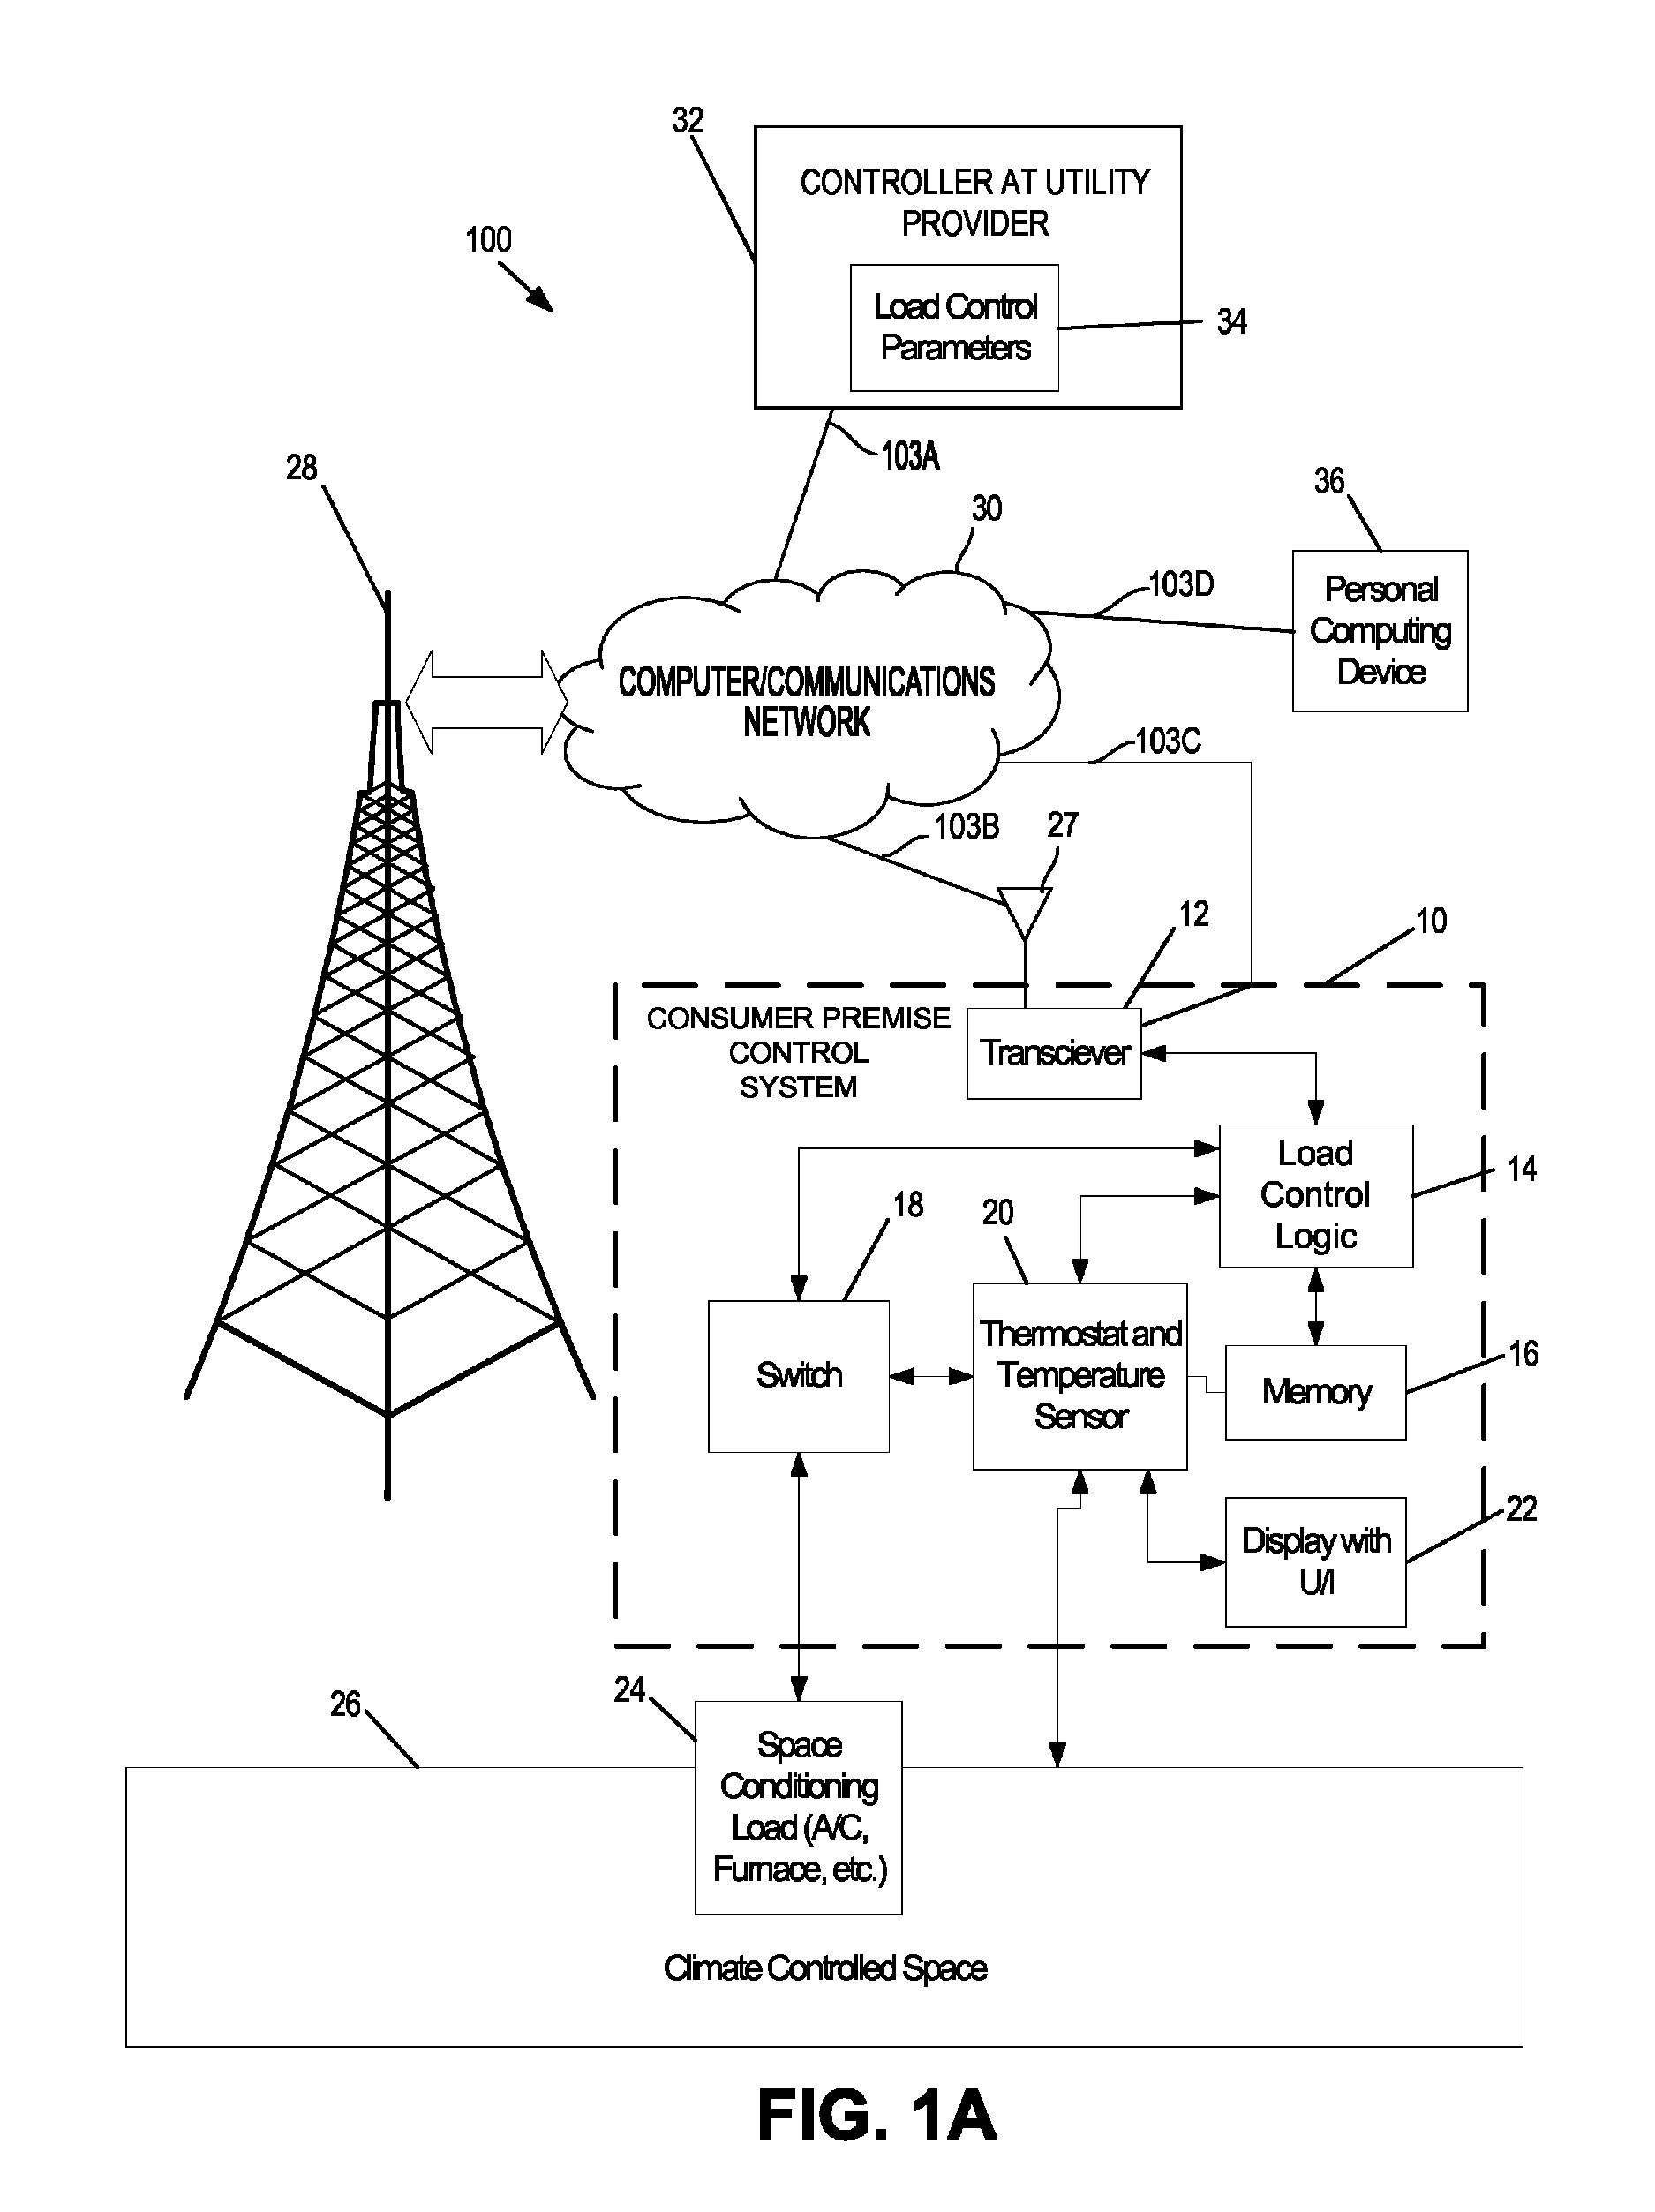 System and method for establishing local control of a space conditioning load during a direct load control event